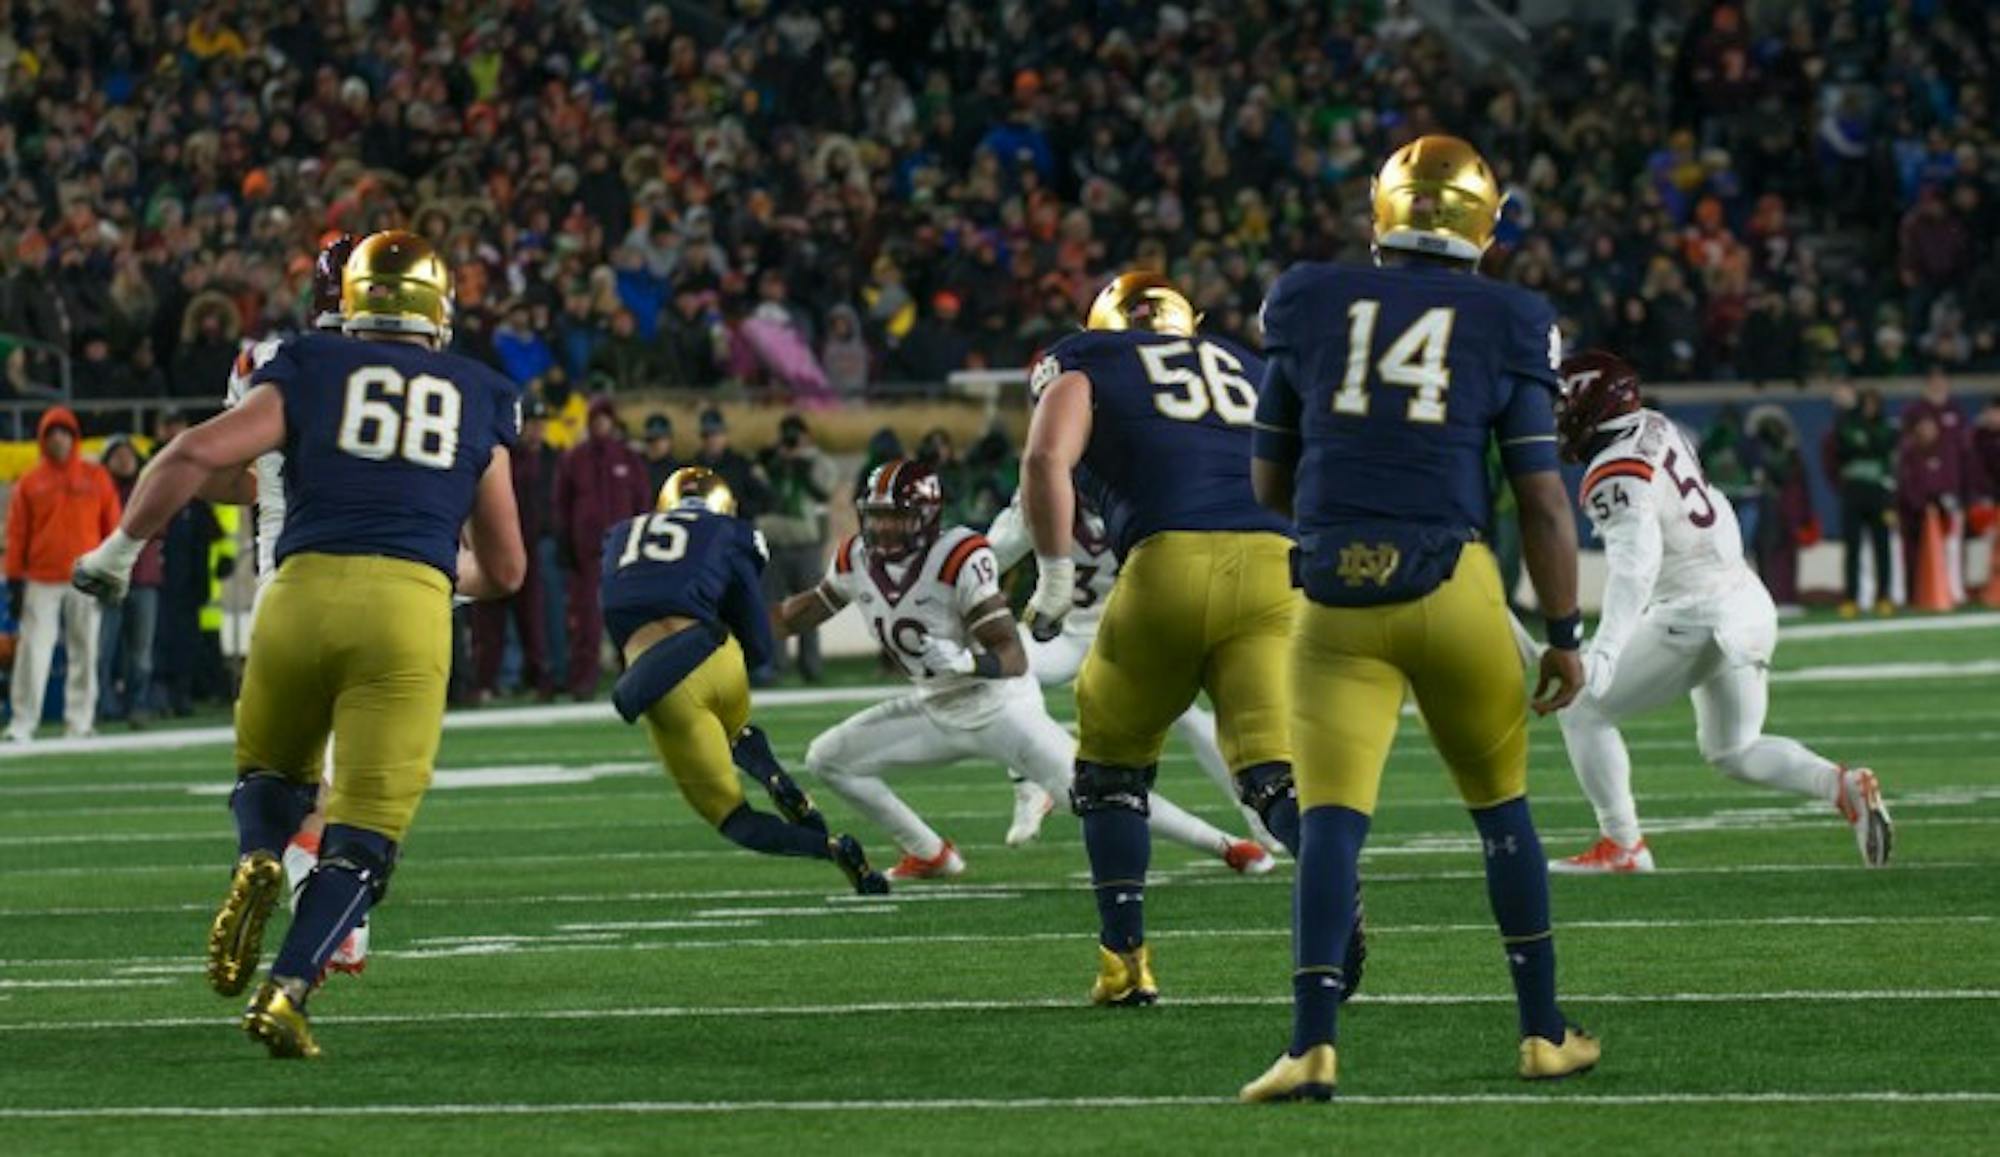 Irish freshman receiver C.J. Sanders catches a pass in Notre Dame's 34-31 loss to Virginia Tech.